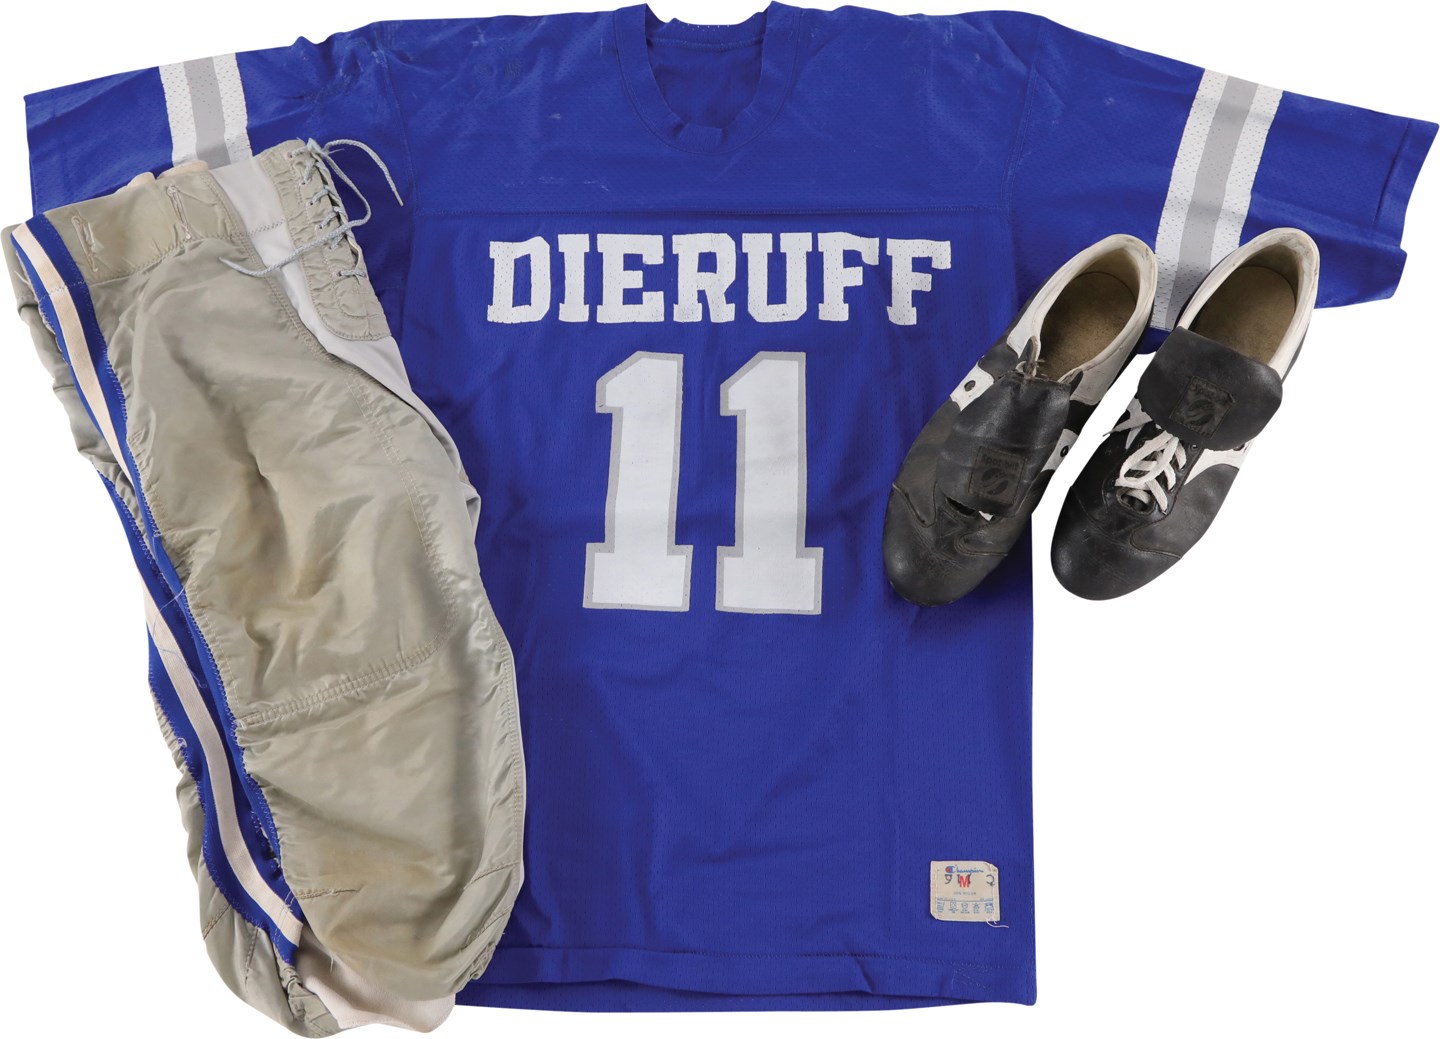 Football - Dieruff High School Game Worn Uniform Attributed to Andre Reed